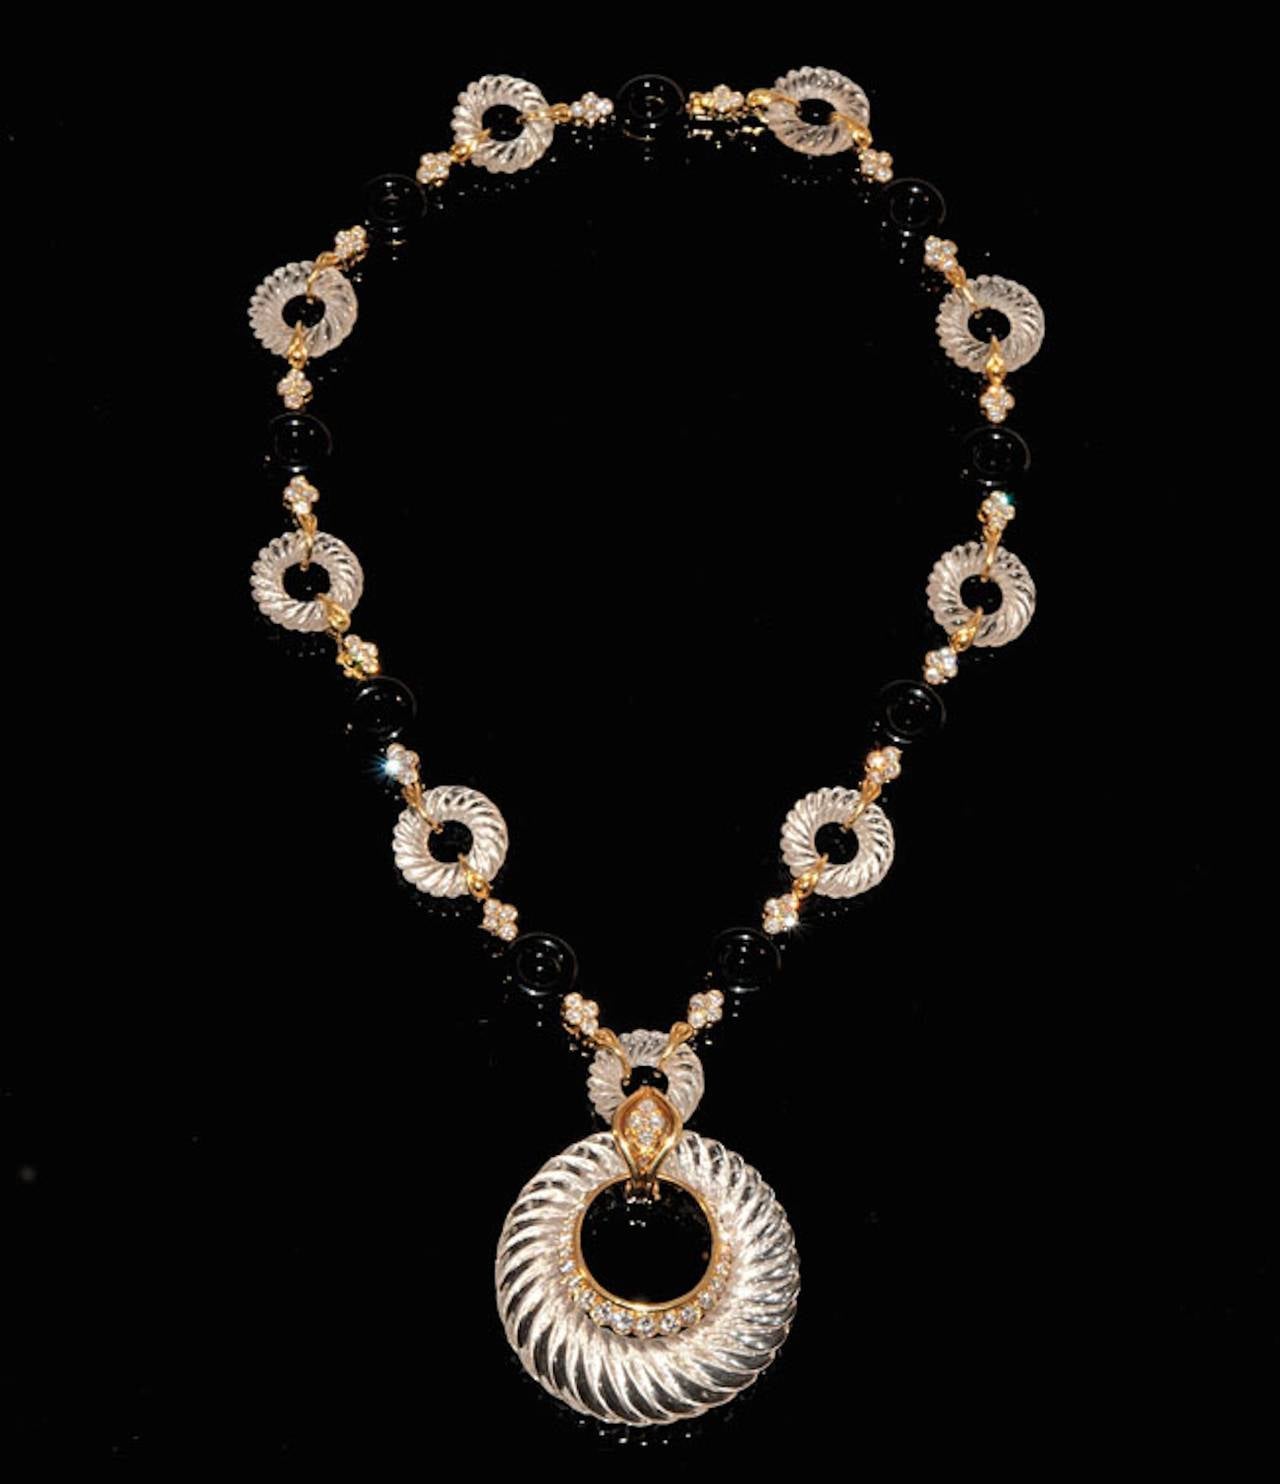 Yellow gold pendant necklace with onyx and rock crystal rings, brilliant-cut diamonds, pendant formed of an elliptical rock crystal enhanced with brilliant-cut diamonds weighing 13 carats, french manufacturer André Vassort hallmark, numbers 8374 and